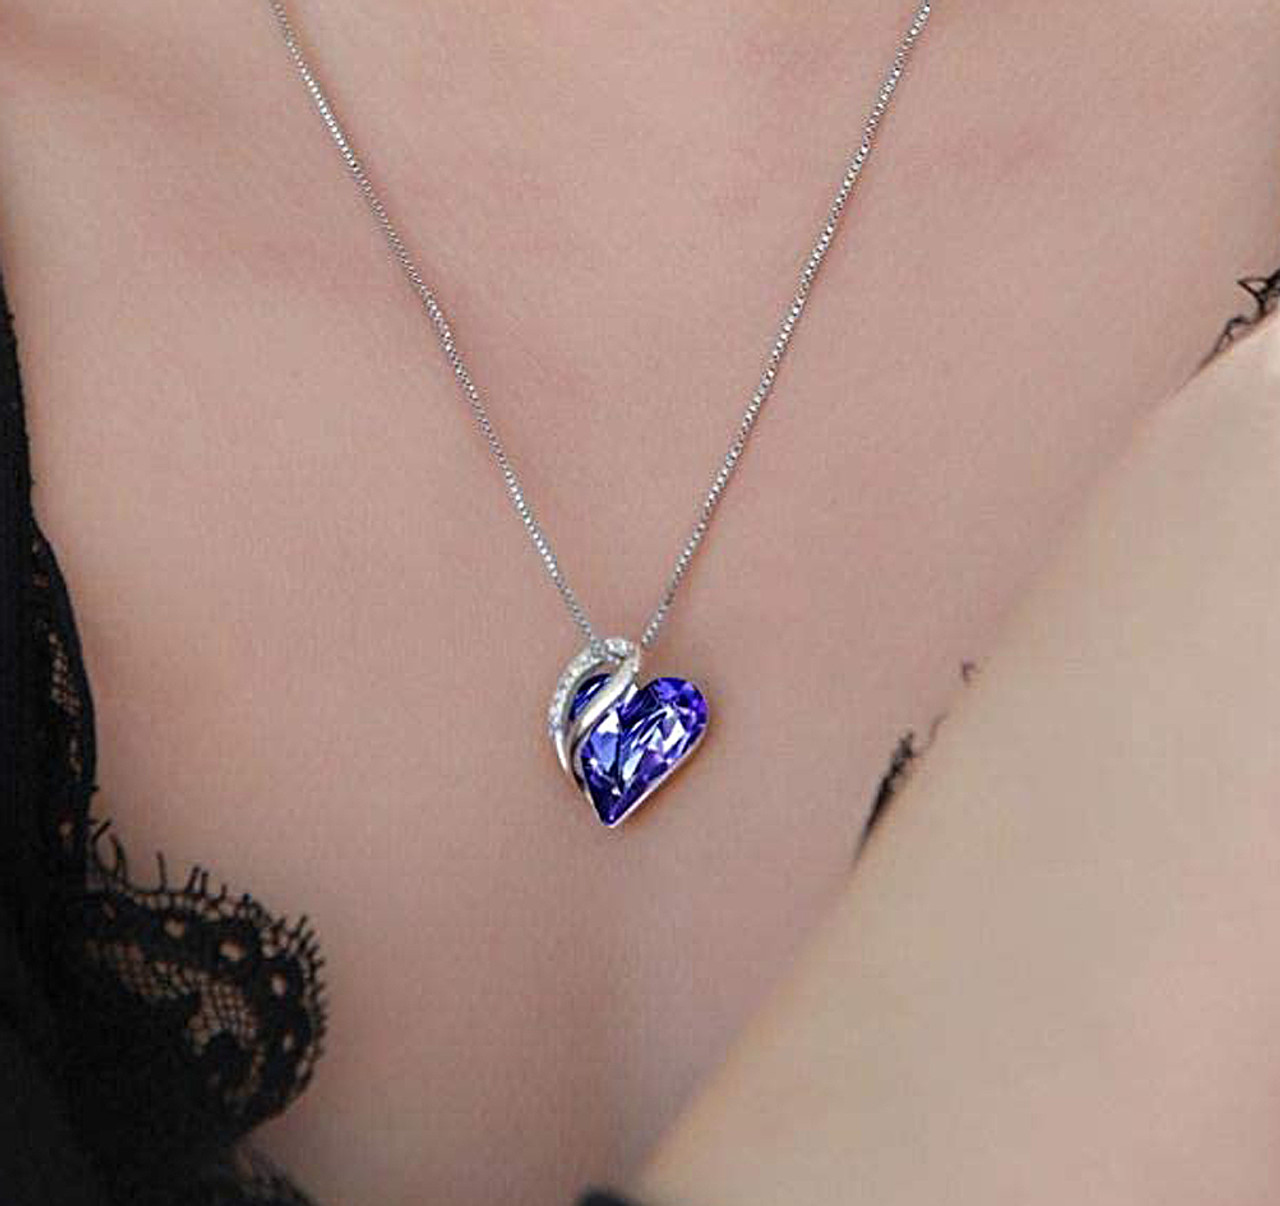 February Birthstone - Tanzanite Purple Looped Heart Design Crystal Pendant and CZ stones - with 18" Chain Necklace. Gift for Lover, Girl Friend, Wife, Valentine's Day Gift, Mother's Day, Anniversary Gift Heart Necklace.